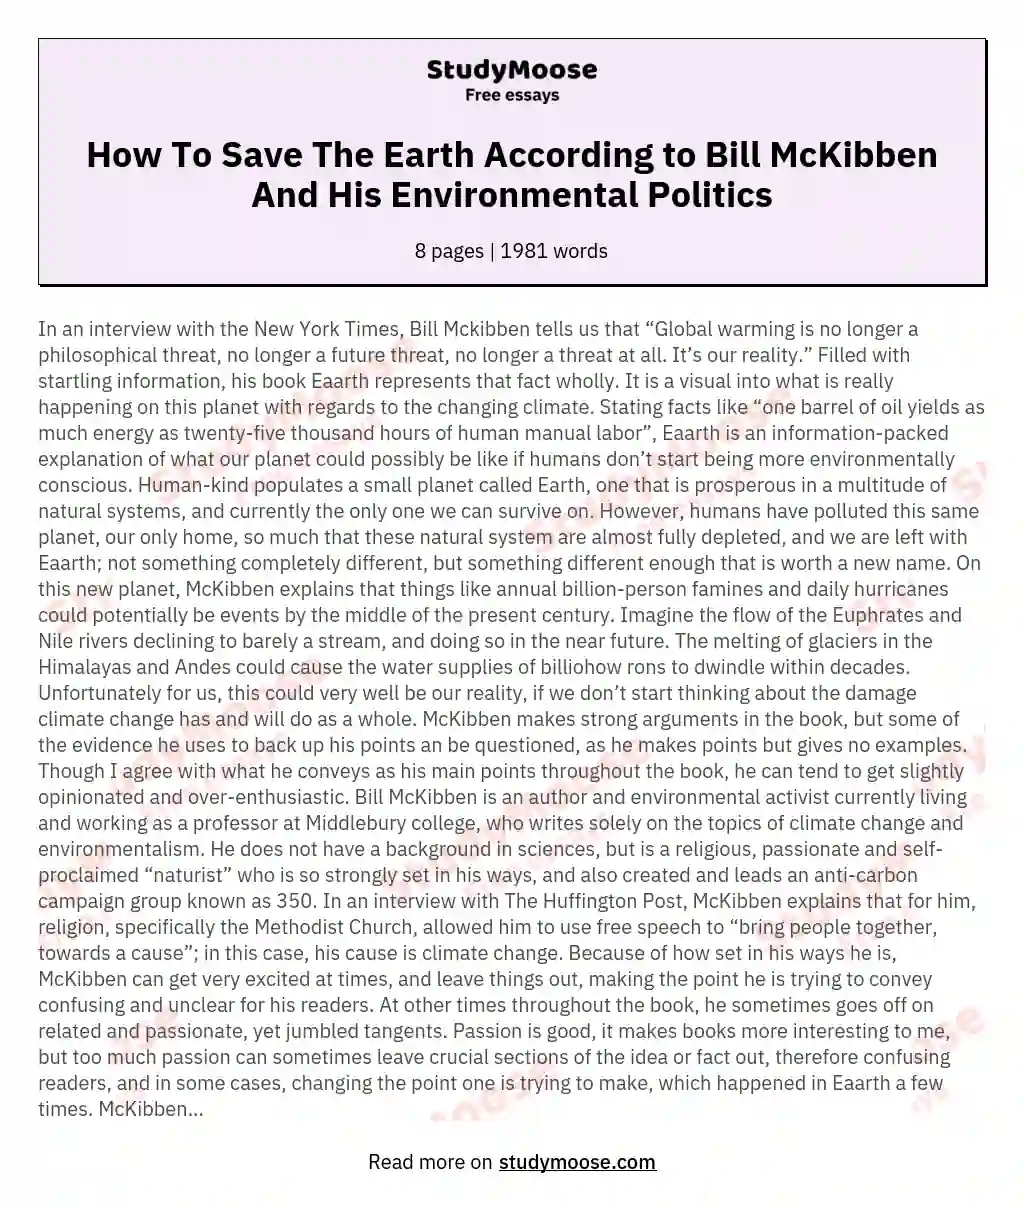 How To Save The Earth According to Bill McKibben And His Environmental Politics essay